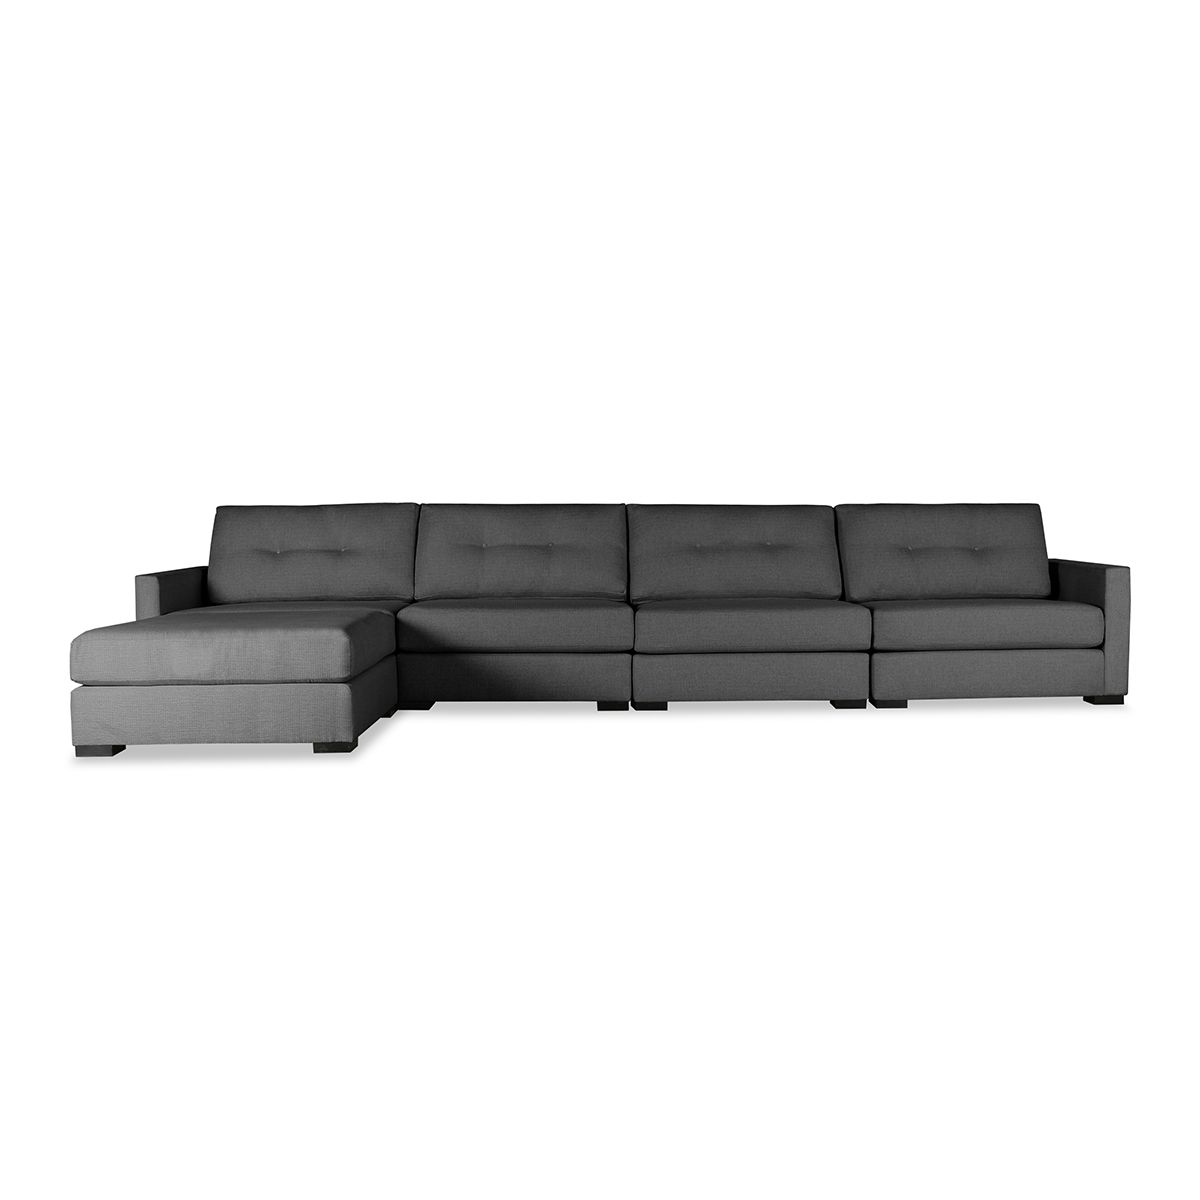 Wilton Fabric Sectional Sofas In 2019 Wilton Buttoned Modular Right Chaise Sectional (View 6 of 20)